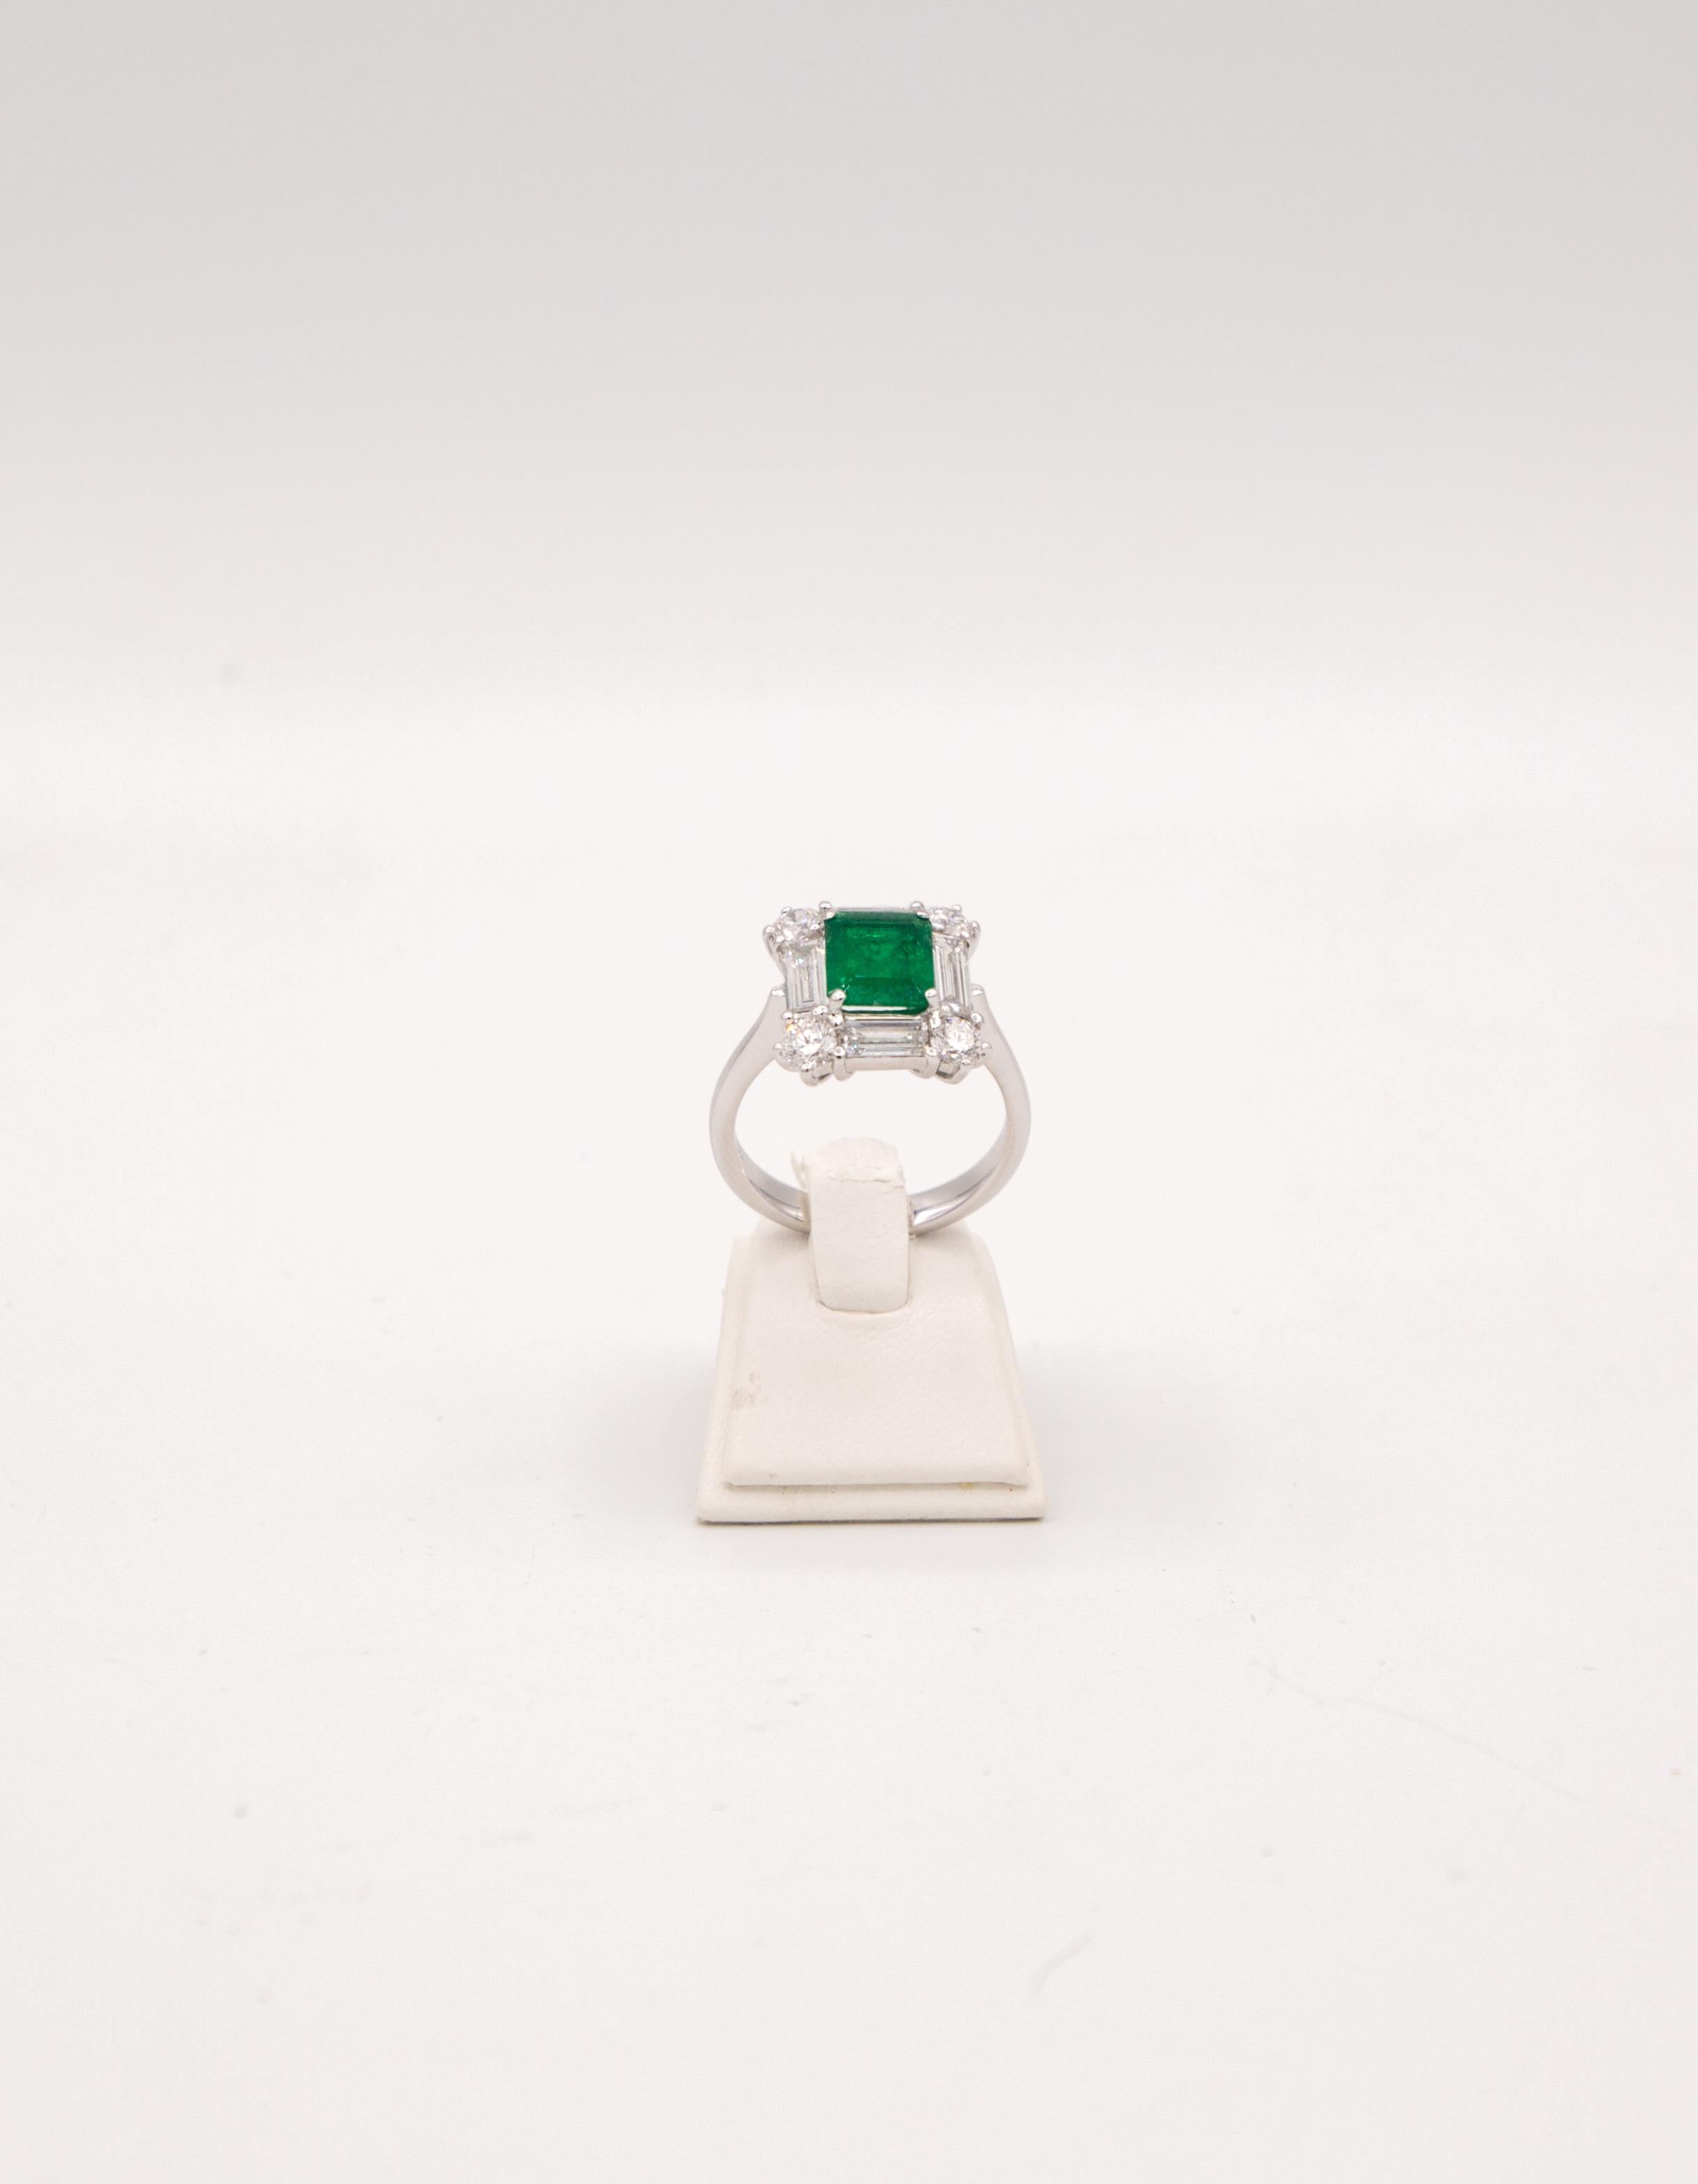 18 k white gold
1,46 ct top quality emerald
2,03 ct diamond 
size 54,5
6,47 gram
An exceptional emerald ring surrounded by 4 diamond baguettes and 4 brilliant-cut diamonds at the corners set in 18 k white gold. A ring that everyone will admire on